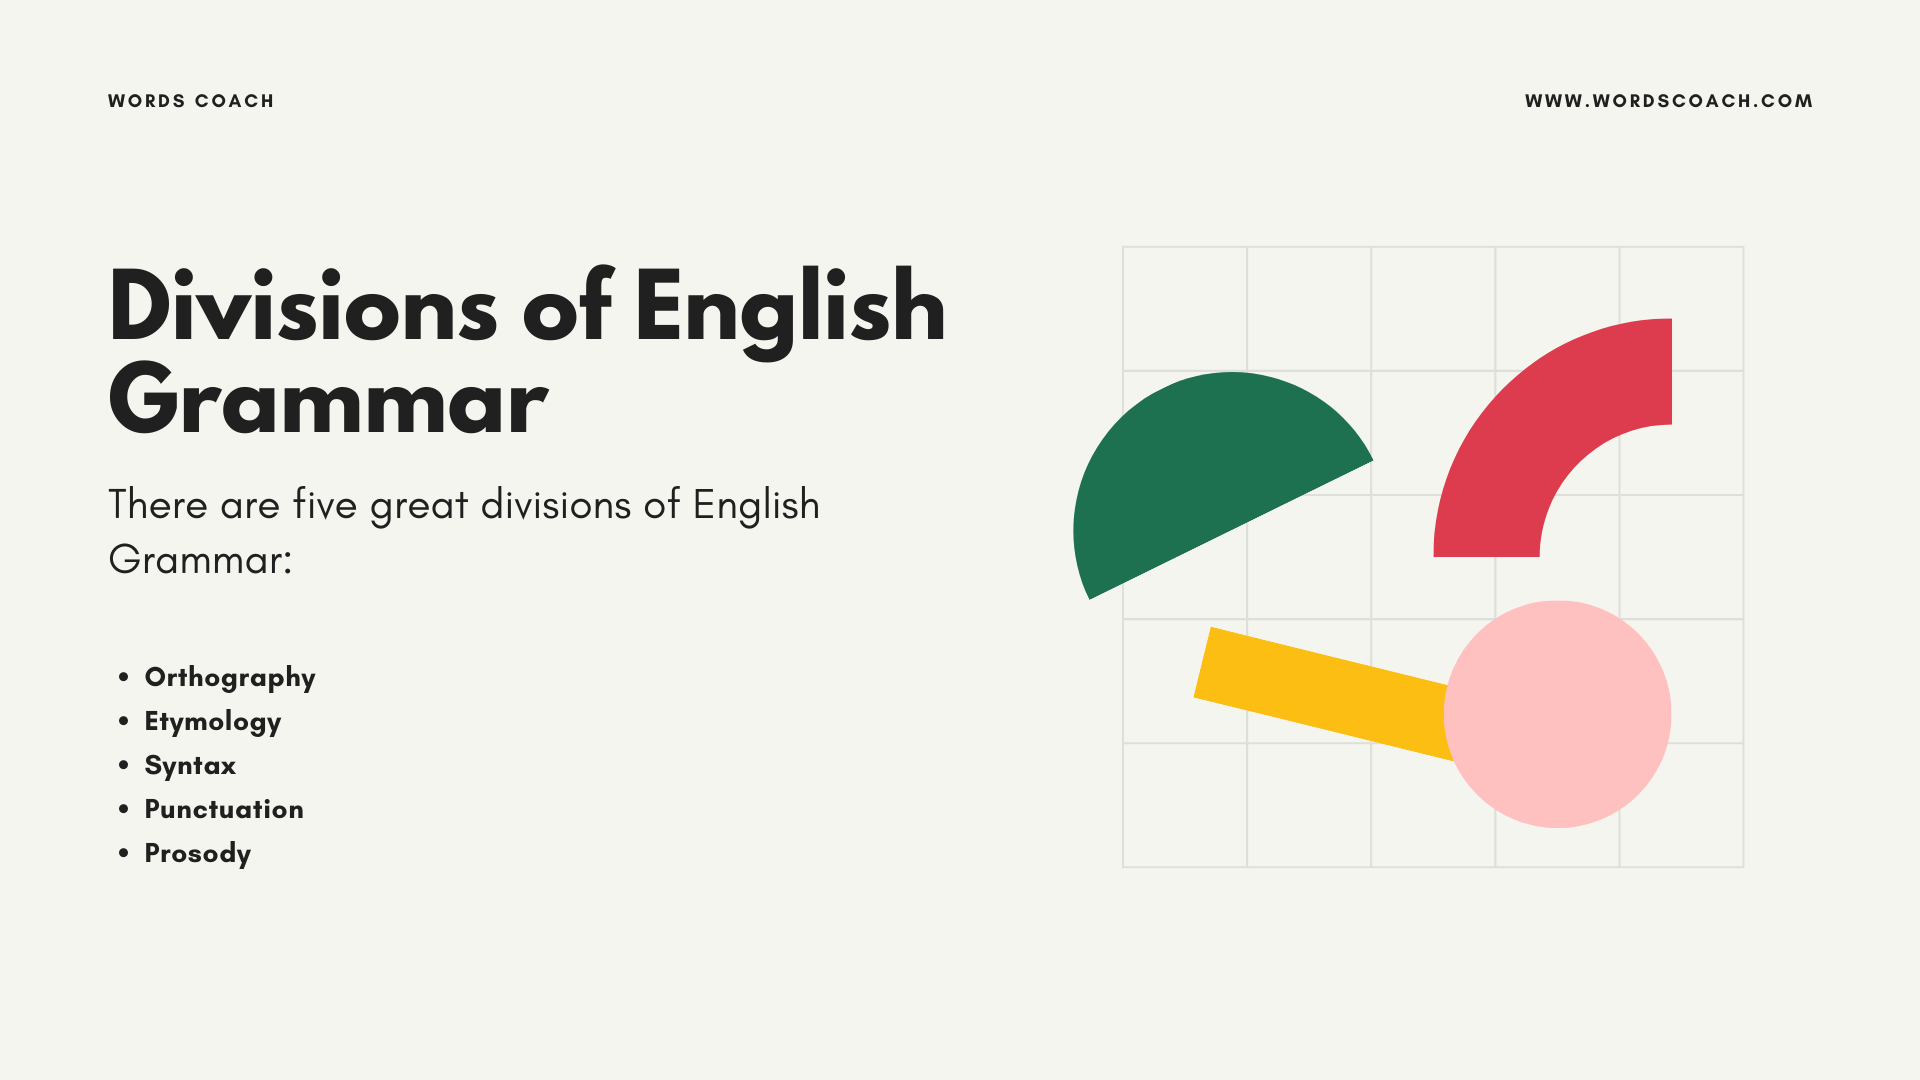 Divisions of English Grammar - Word Coach